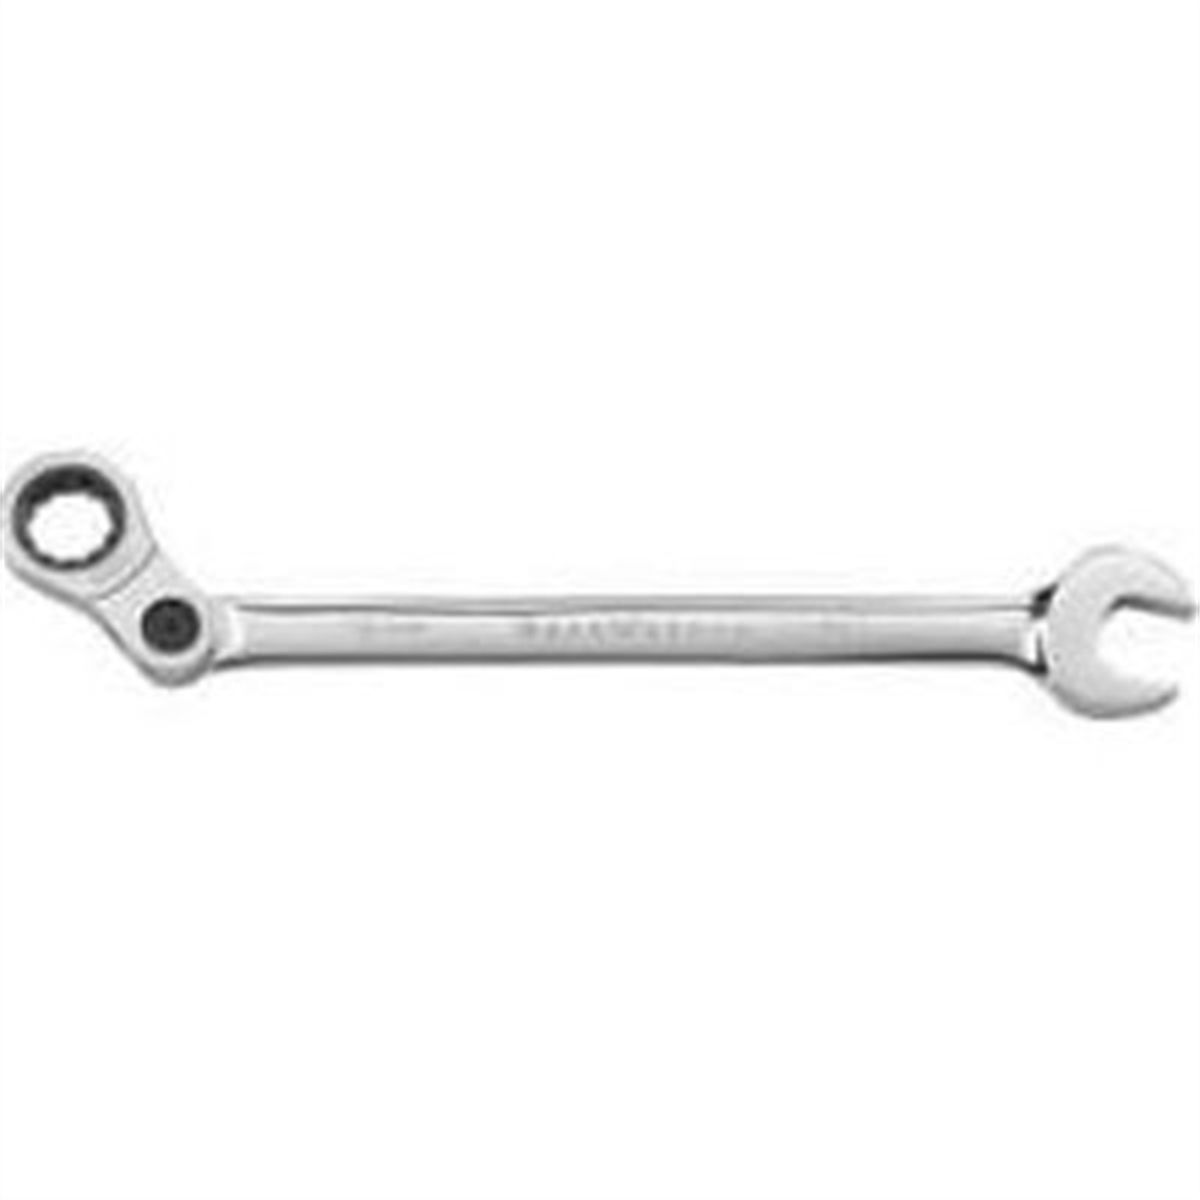 10 mm Indexing Combination Wrench